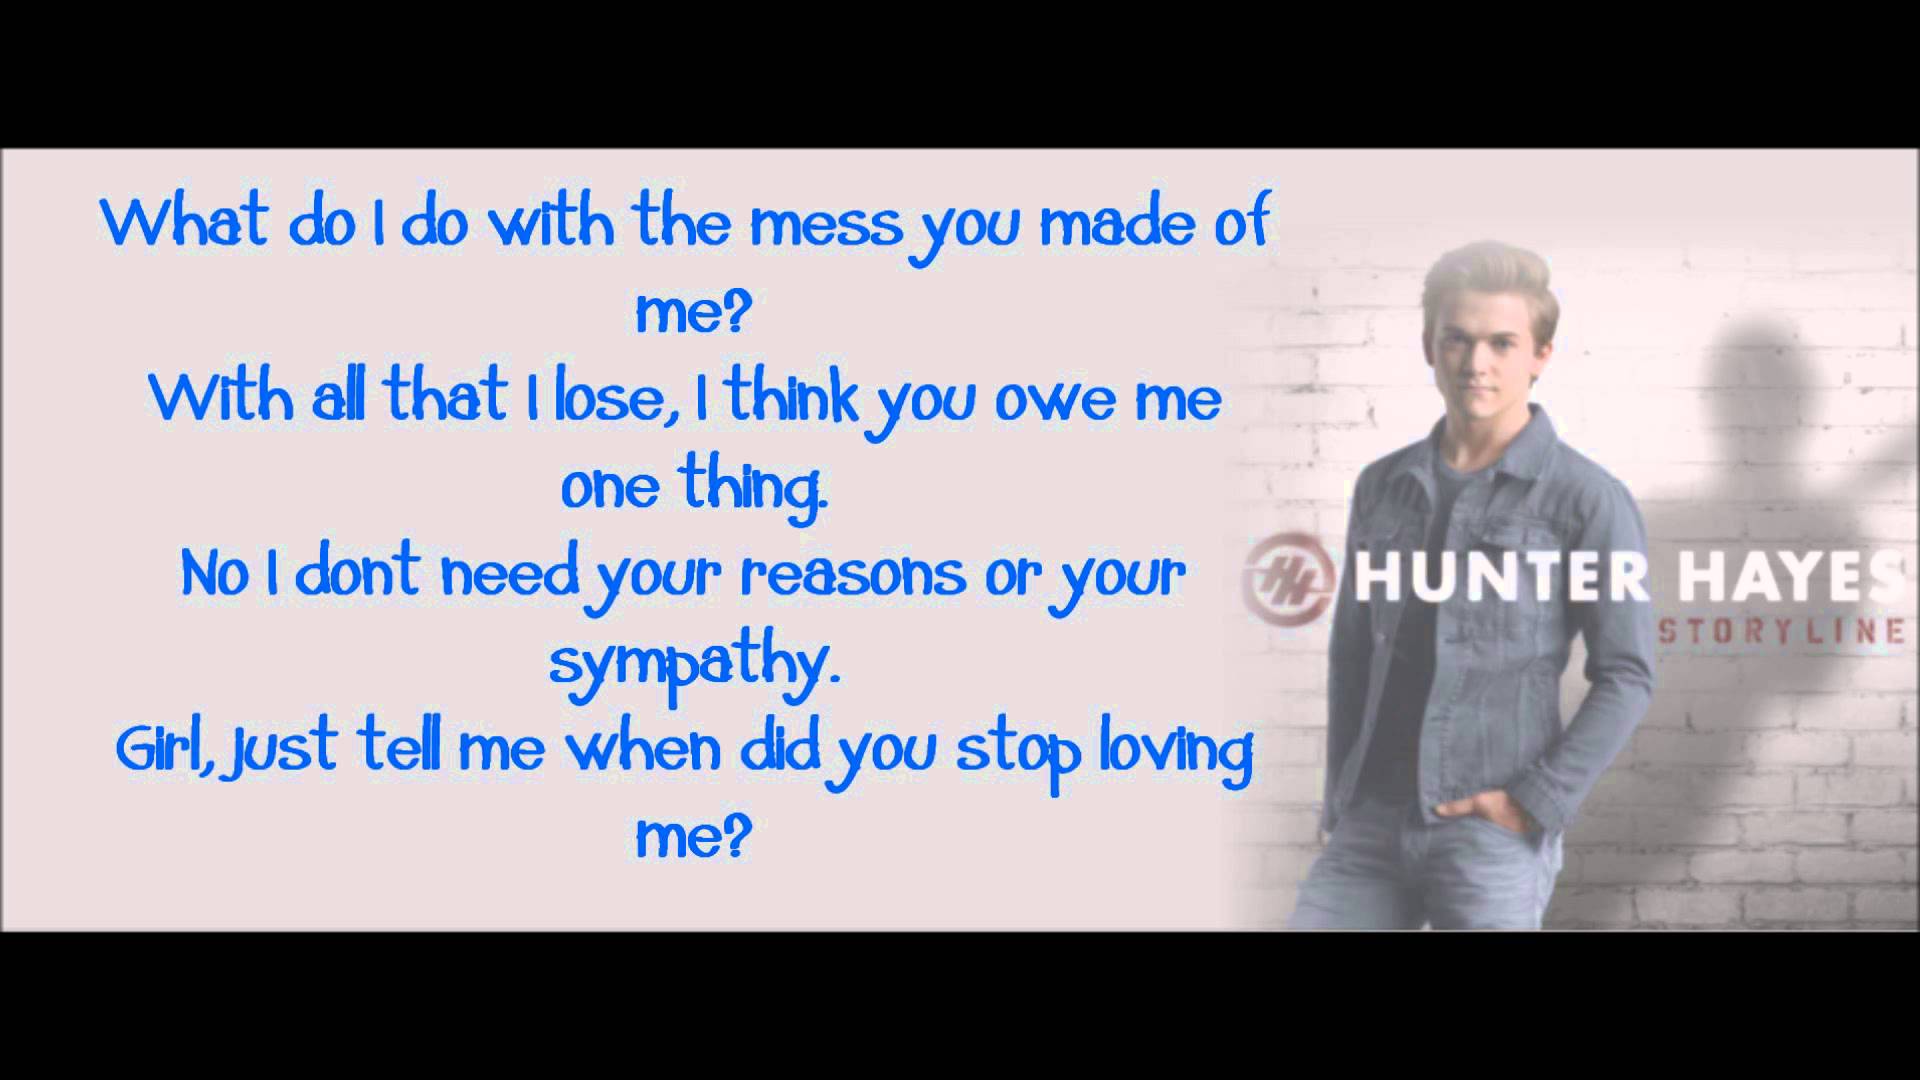 Hunter Hayes – When Did You Stop Loving Me